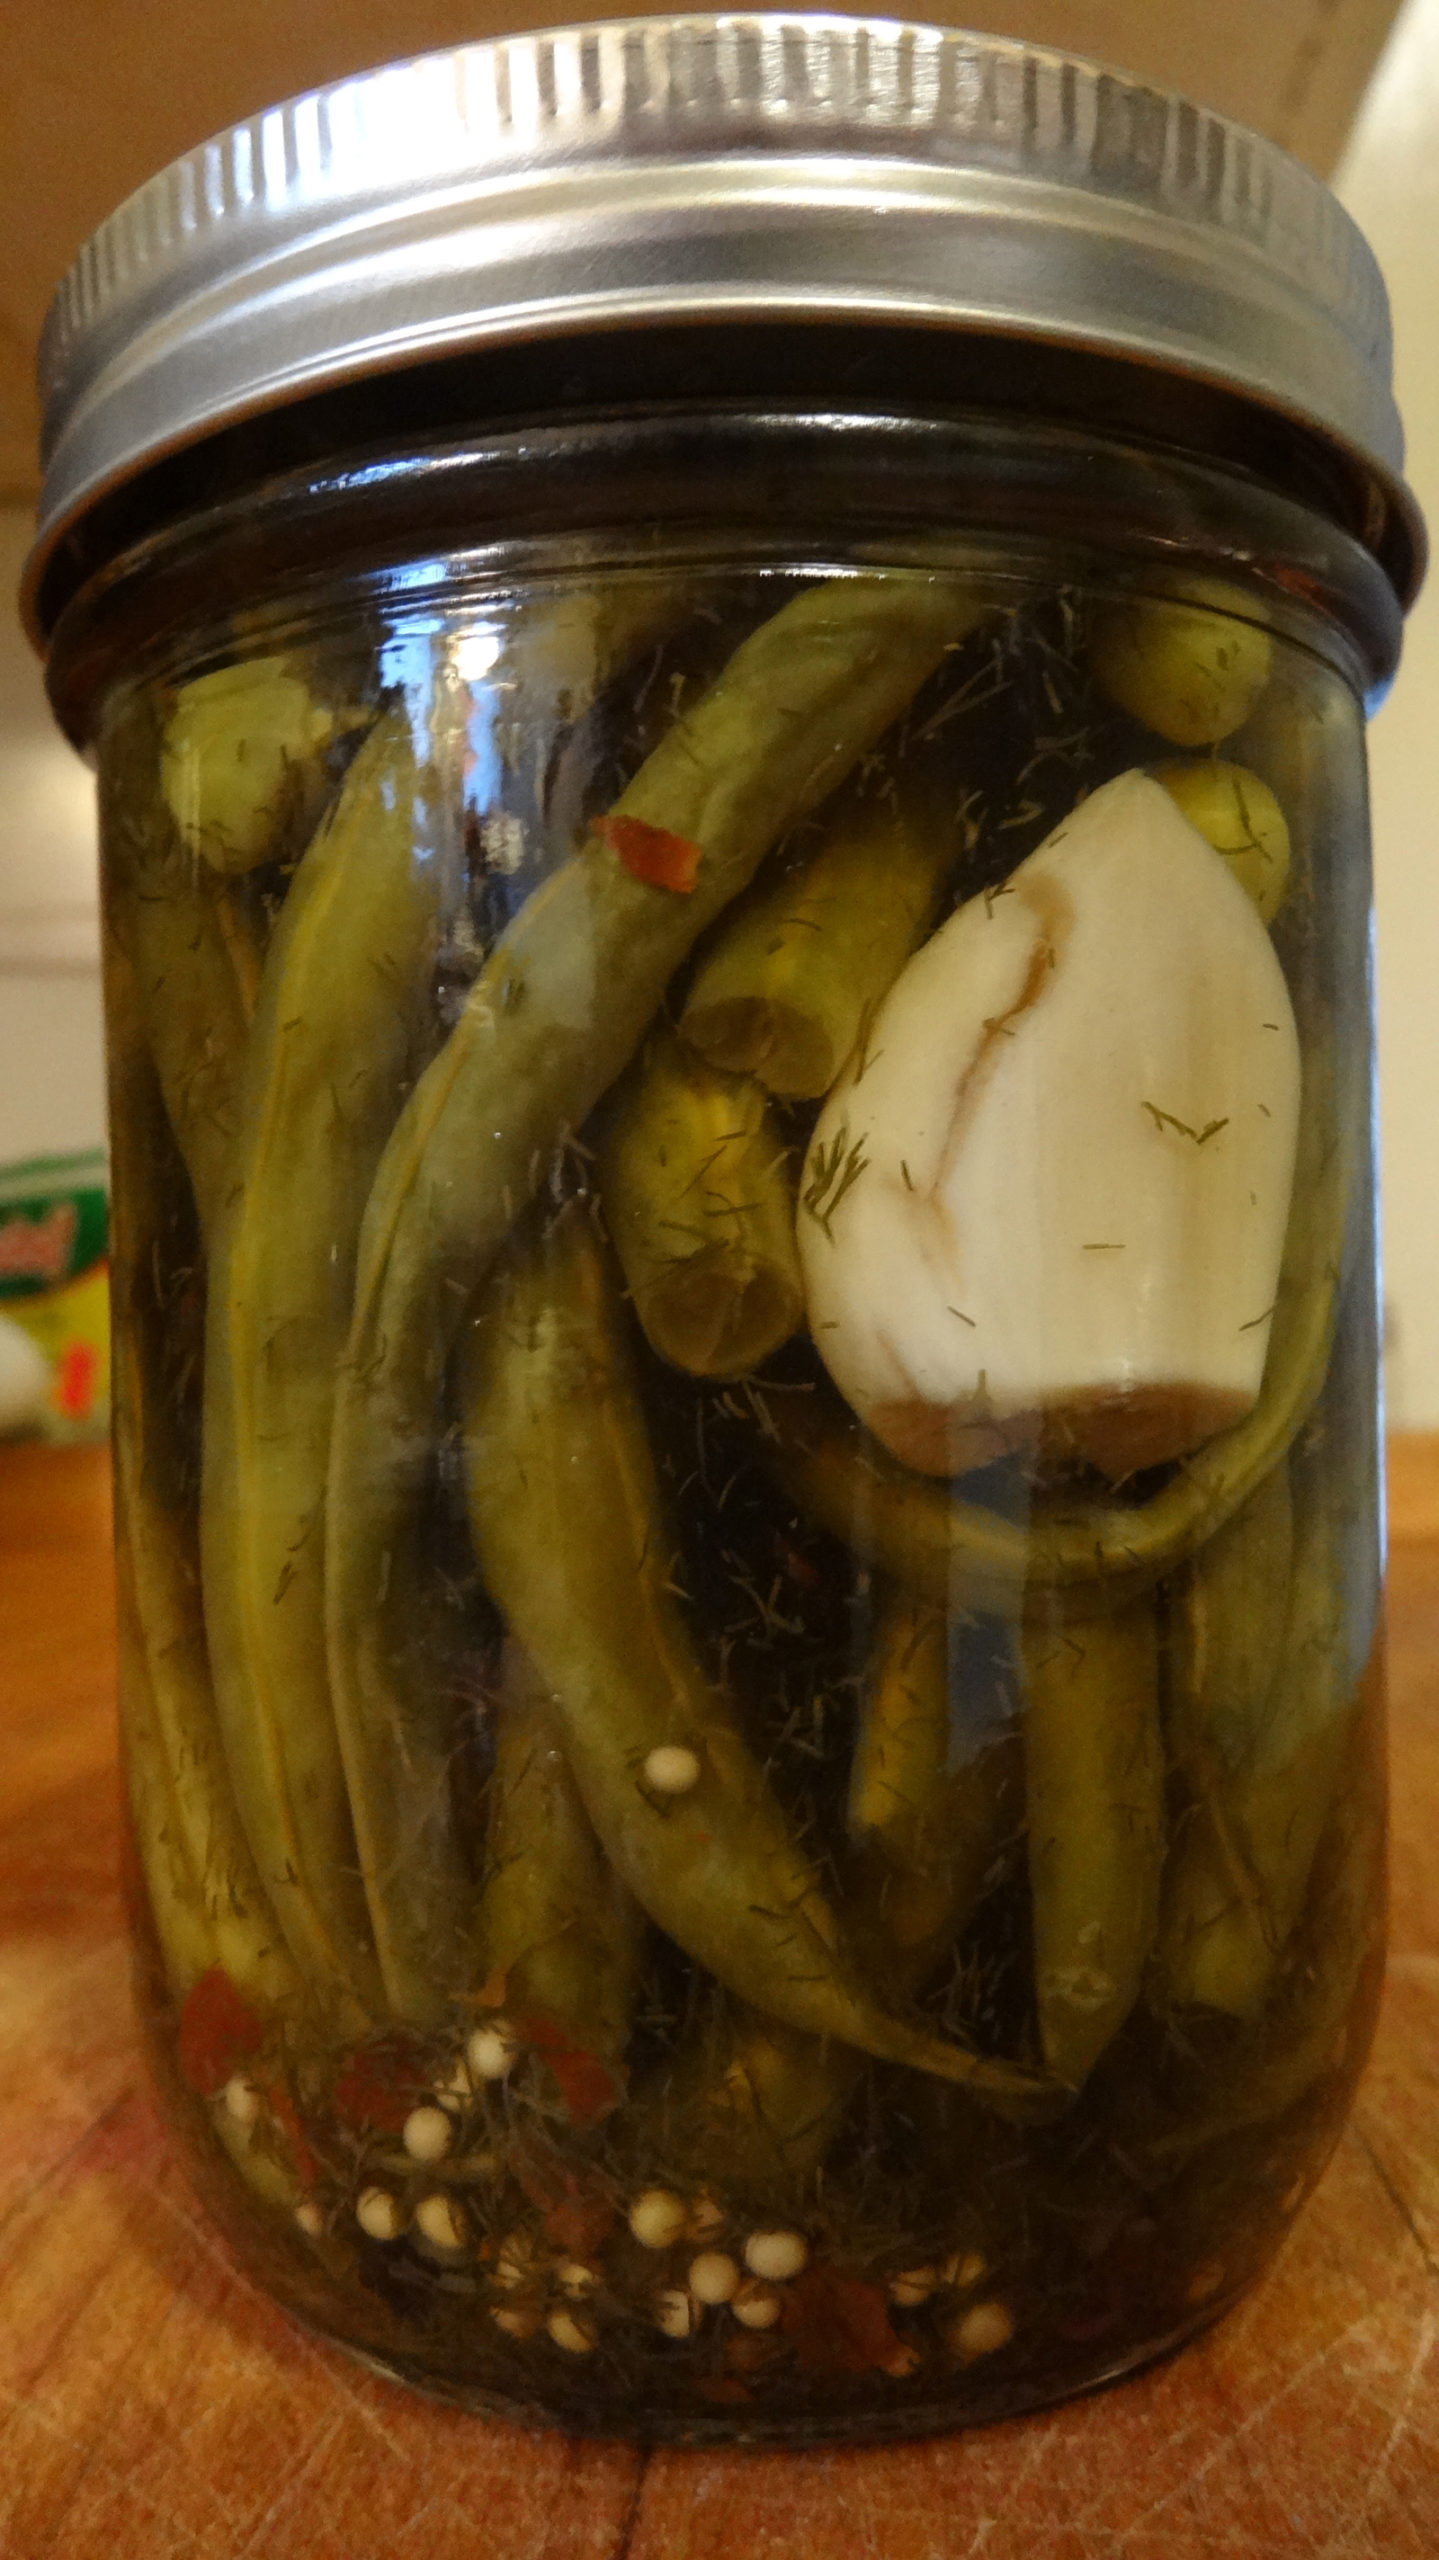 The Basics Of Home Canning And Pickling